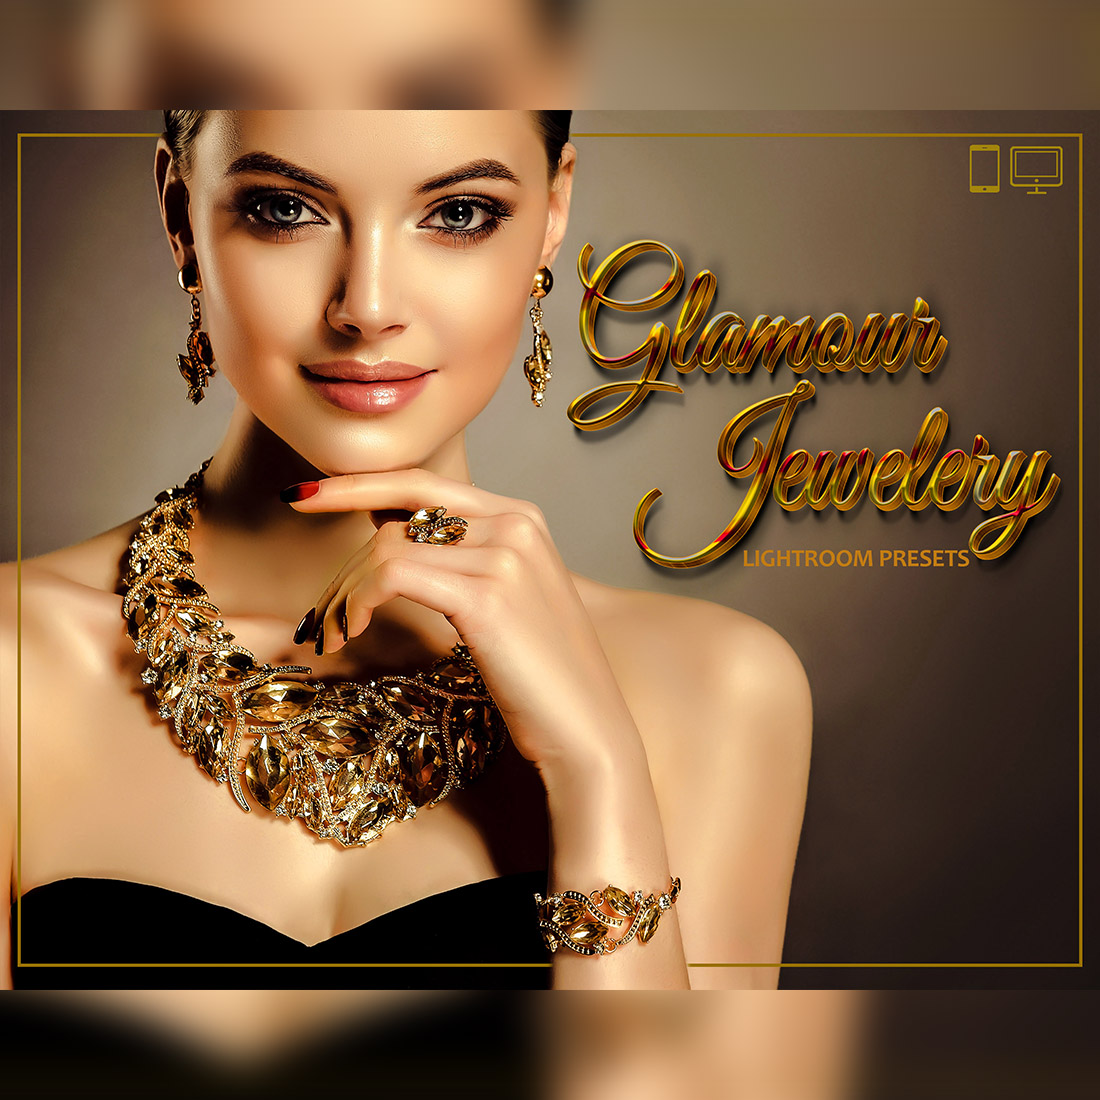 12 Glamour Jewelry Lightroom Presets, Jewelry Mobile Preset, Earring Desktop LR Filter DNG Lifestyle Theme For Blogger Portrait Instagram cover image.